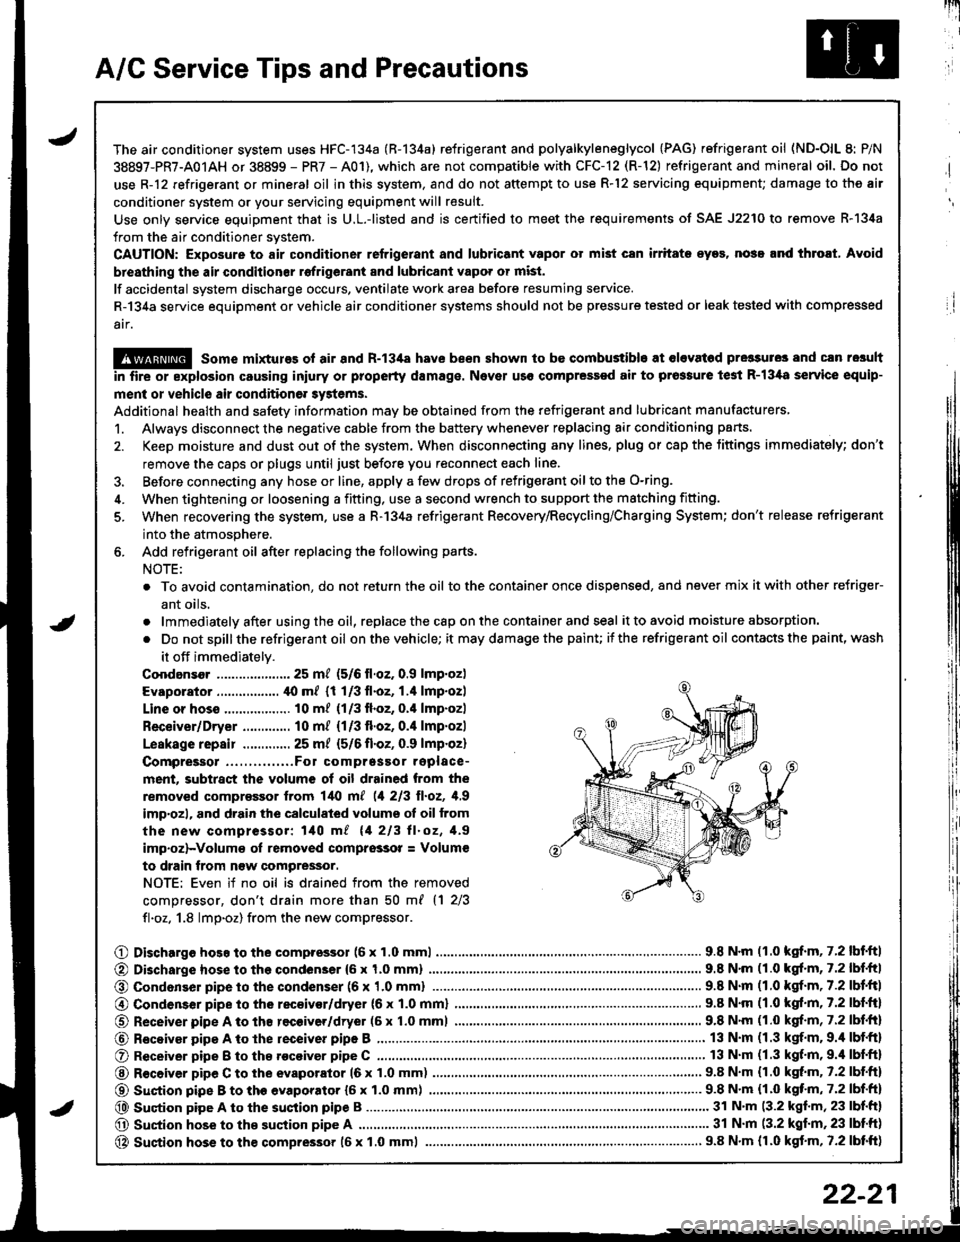 HONDA INTEGRA 1998 4.G Workshop Manual A/C Service Tips and Precautions
The air conditioner system uses HFC-134a (R-134a) refrigerant and polyalkyleneglycol {PAG) refrigerant oil (ND-OlL 8: P/N
38897-PR7-A01AH or 38899 - PR7 - A01), which 